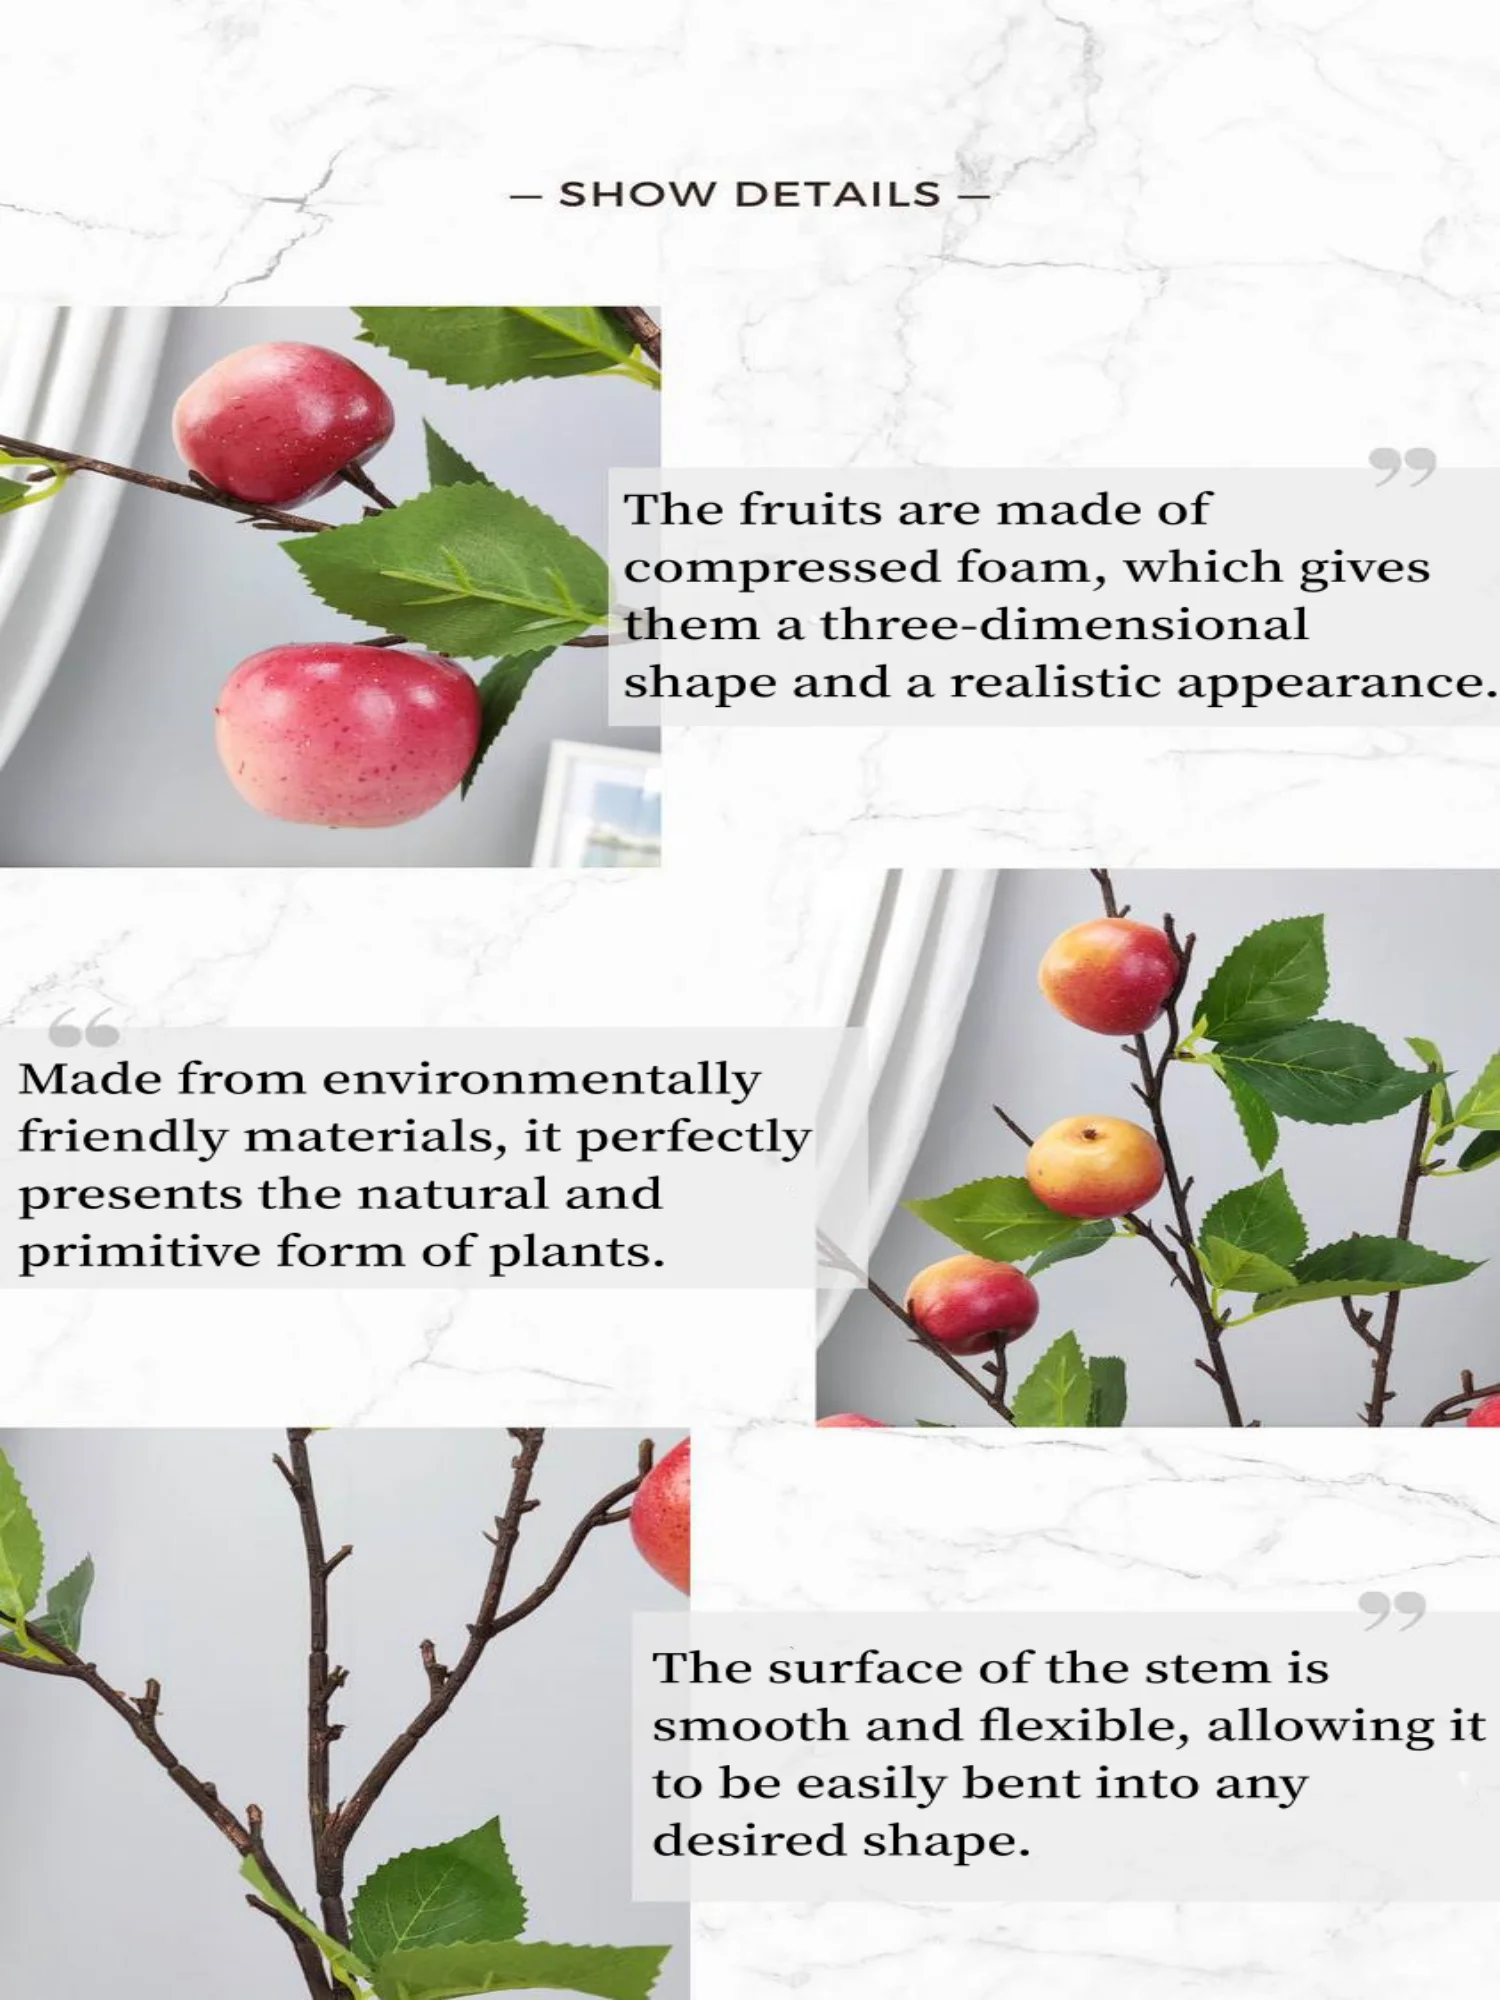 5  Fruits Red  Simulation Artificial Apple Tree Branch For Living Room Furnishings Floral Decoration Festival Ceremony